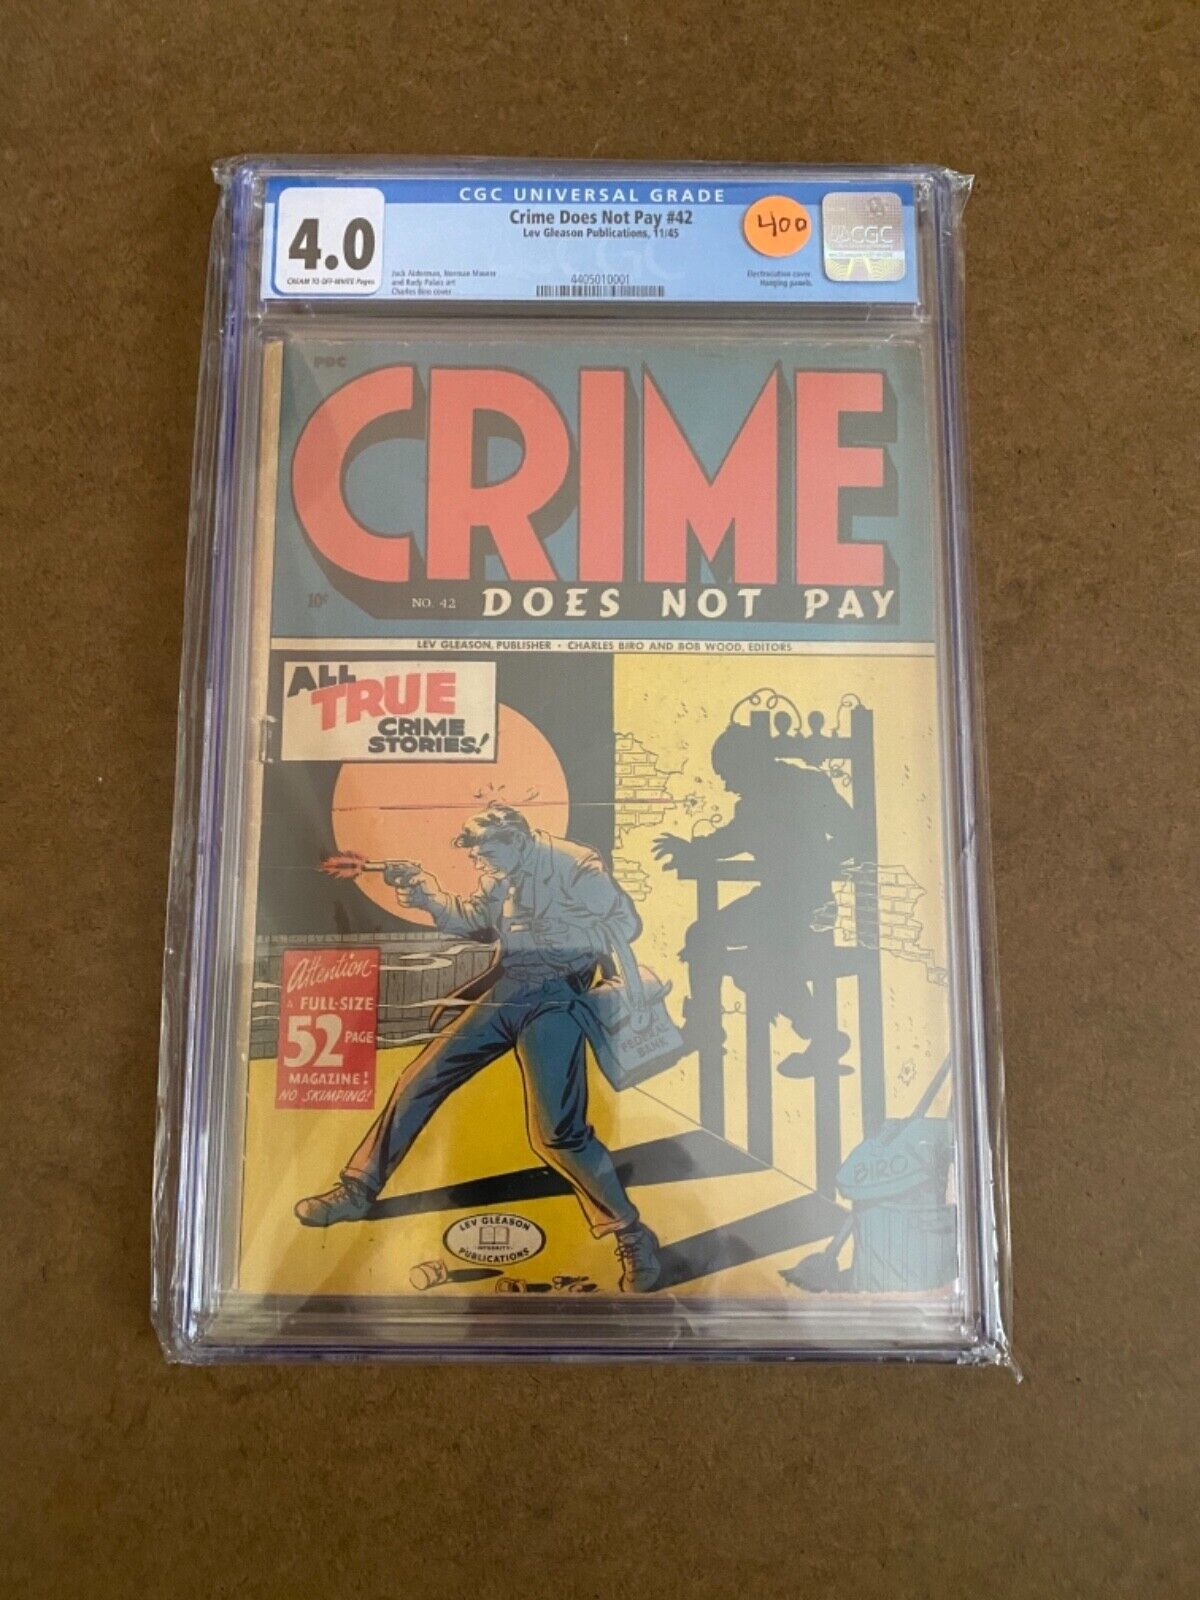 RARE Crime Does Not Pay #42 - Lev Gleason Pub. 1945 CGC 4.0 Electrocution cover